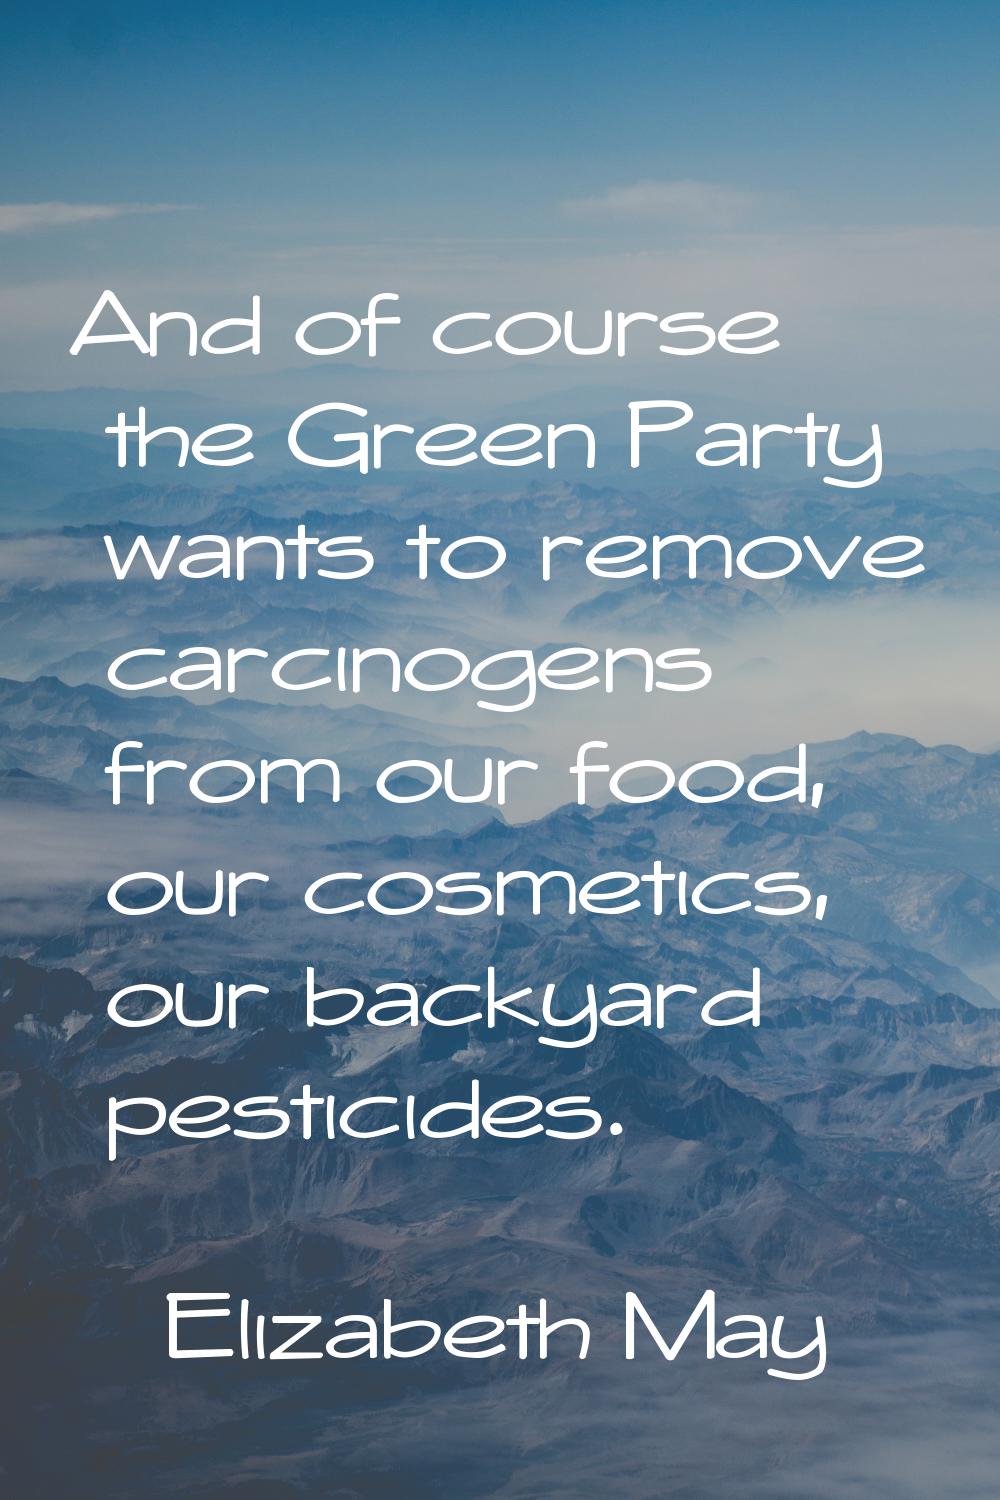 And of course the Green Party wants to remove carcinogens from our food, our cosmetics, our backyar